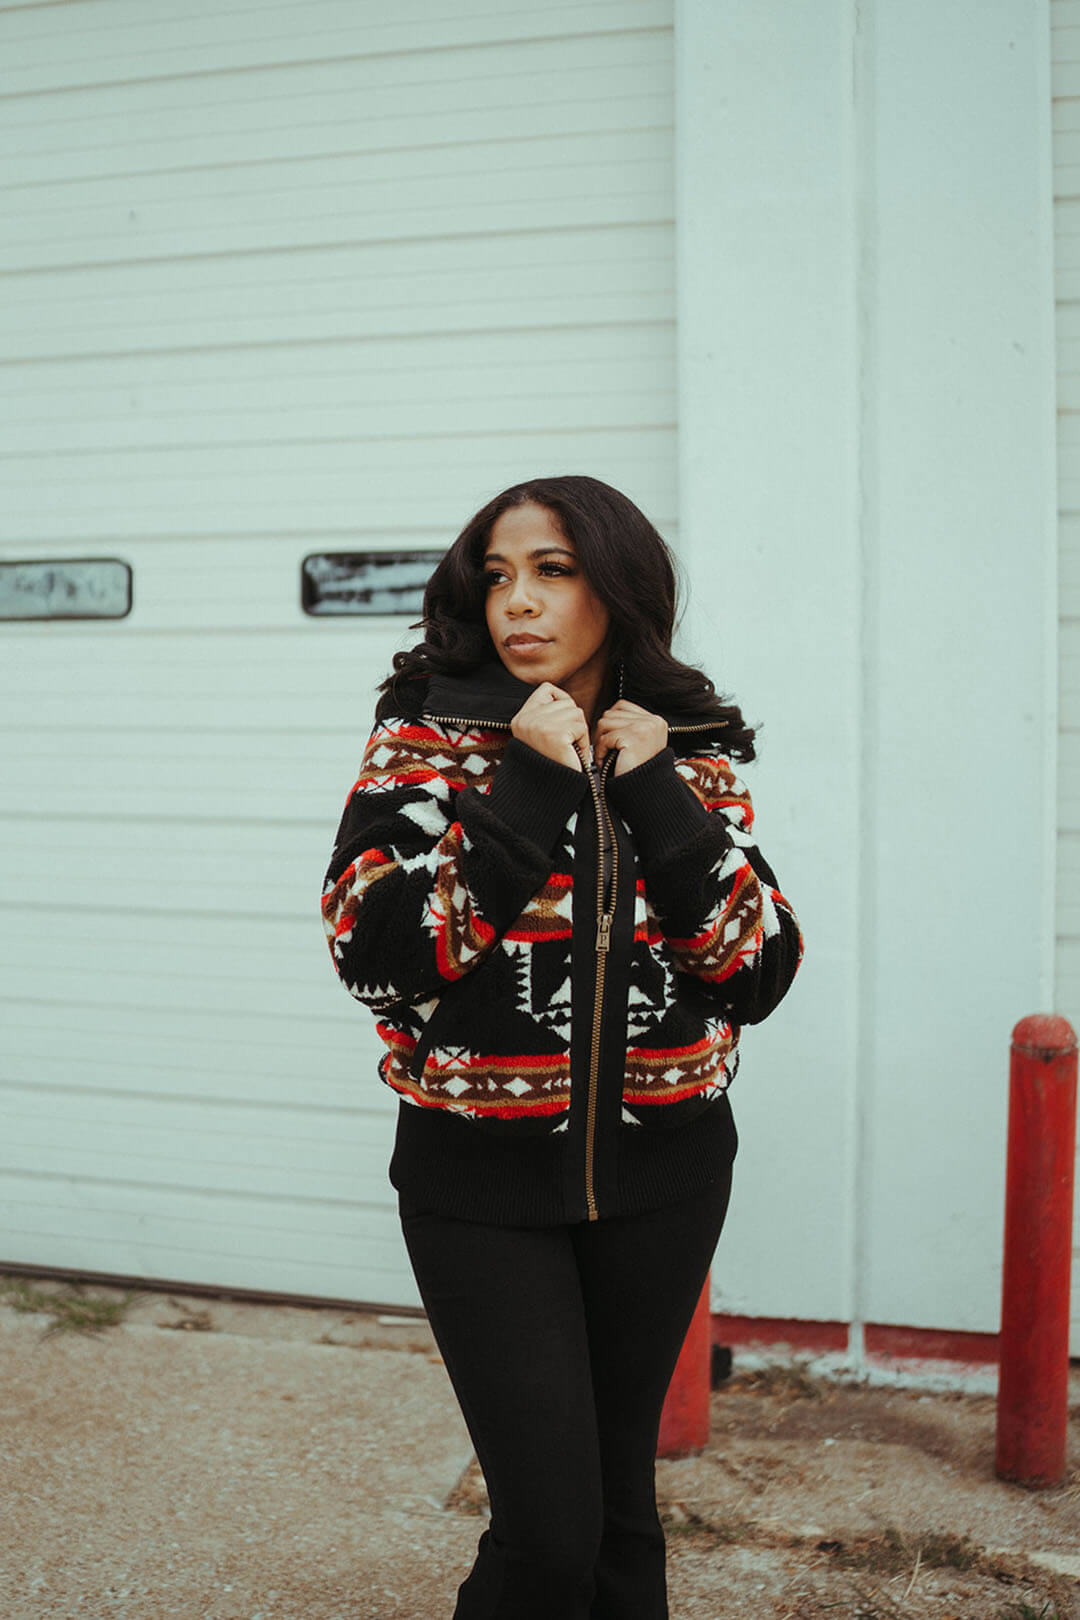 Woman modeling the foxglove range fleece bomber by pendleton.  The bomber/jacket is black and features an aztec pattern throughout in red cream and white colors.